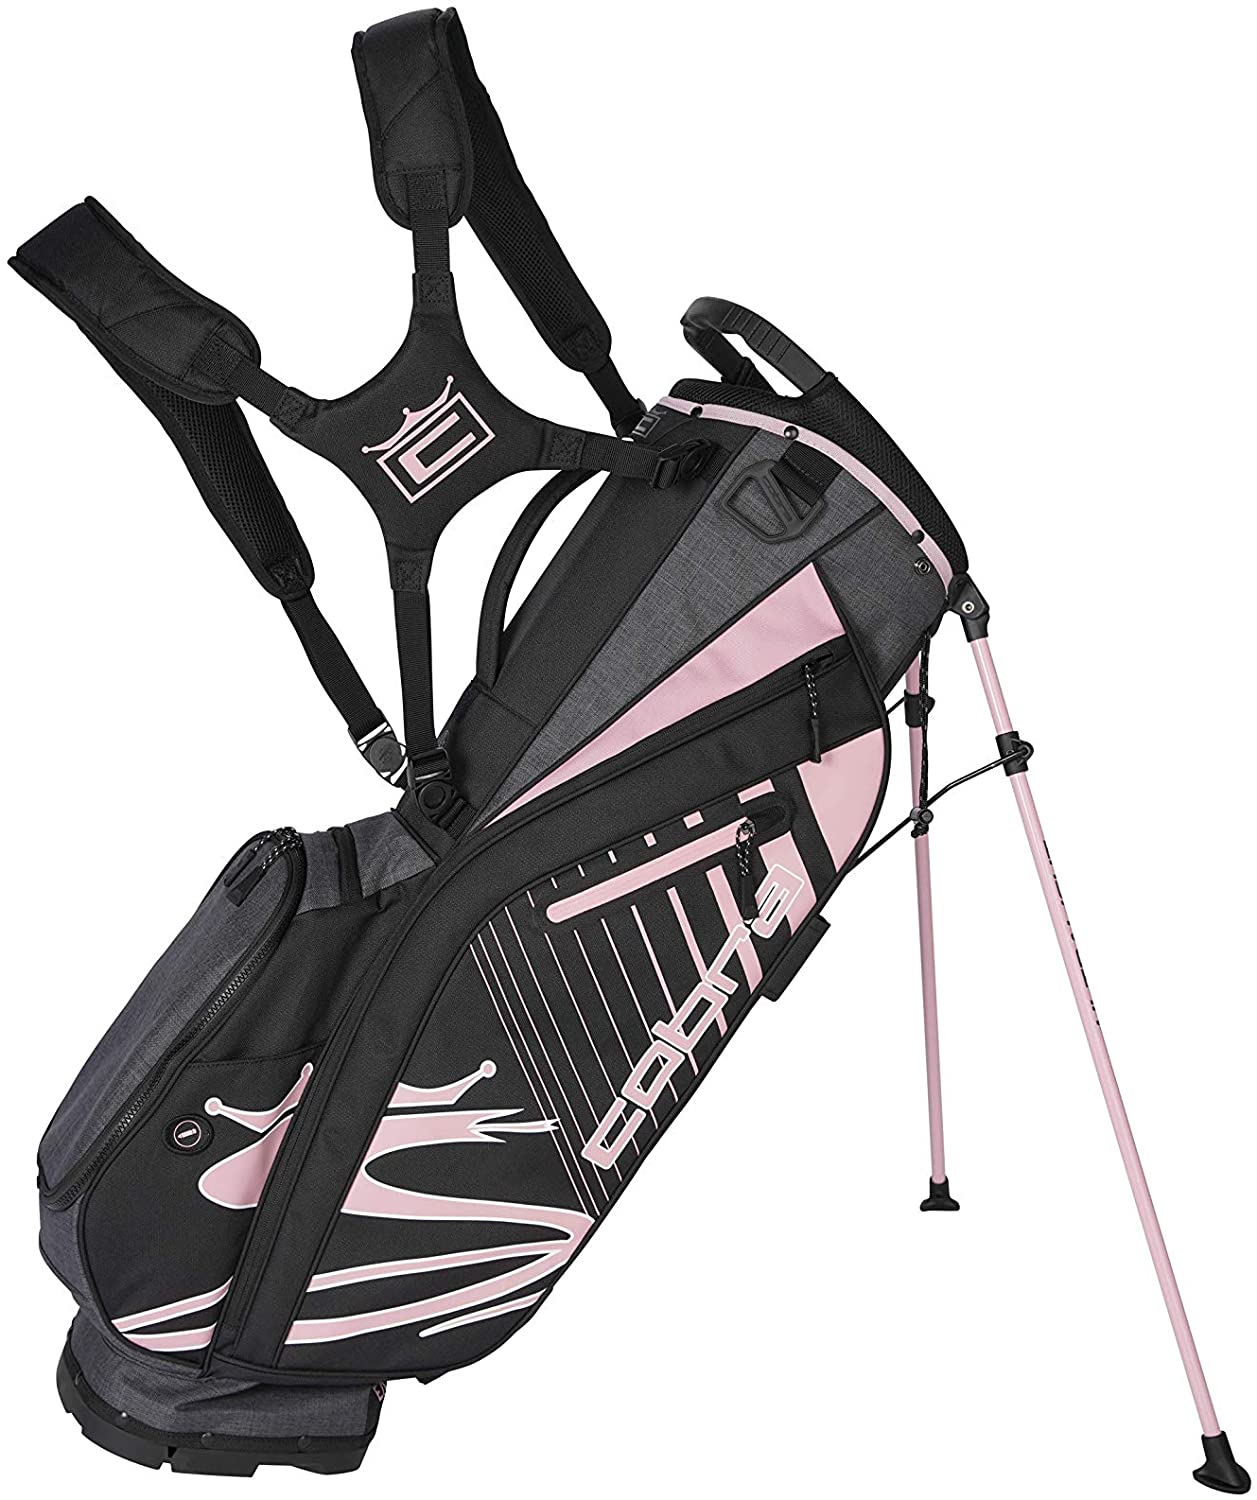 Best Affordable Golf Bags Under 200 In 2021 (MUST READ Before You Buy)